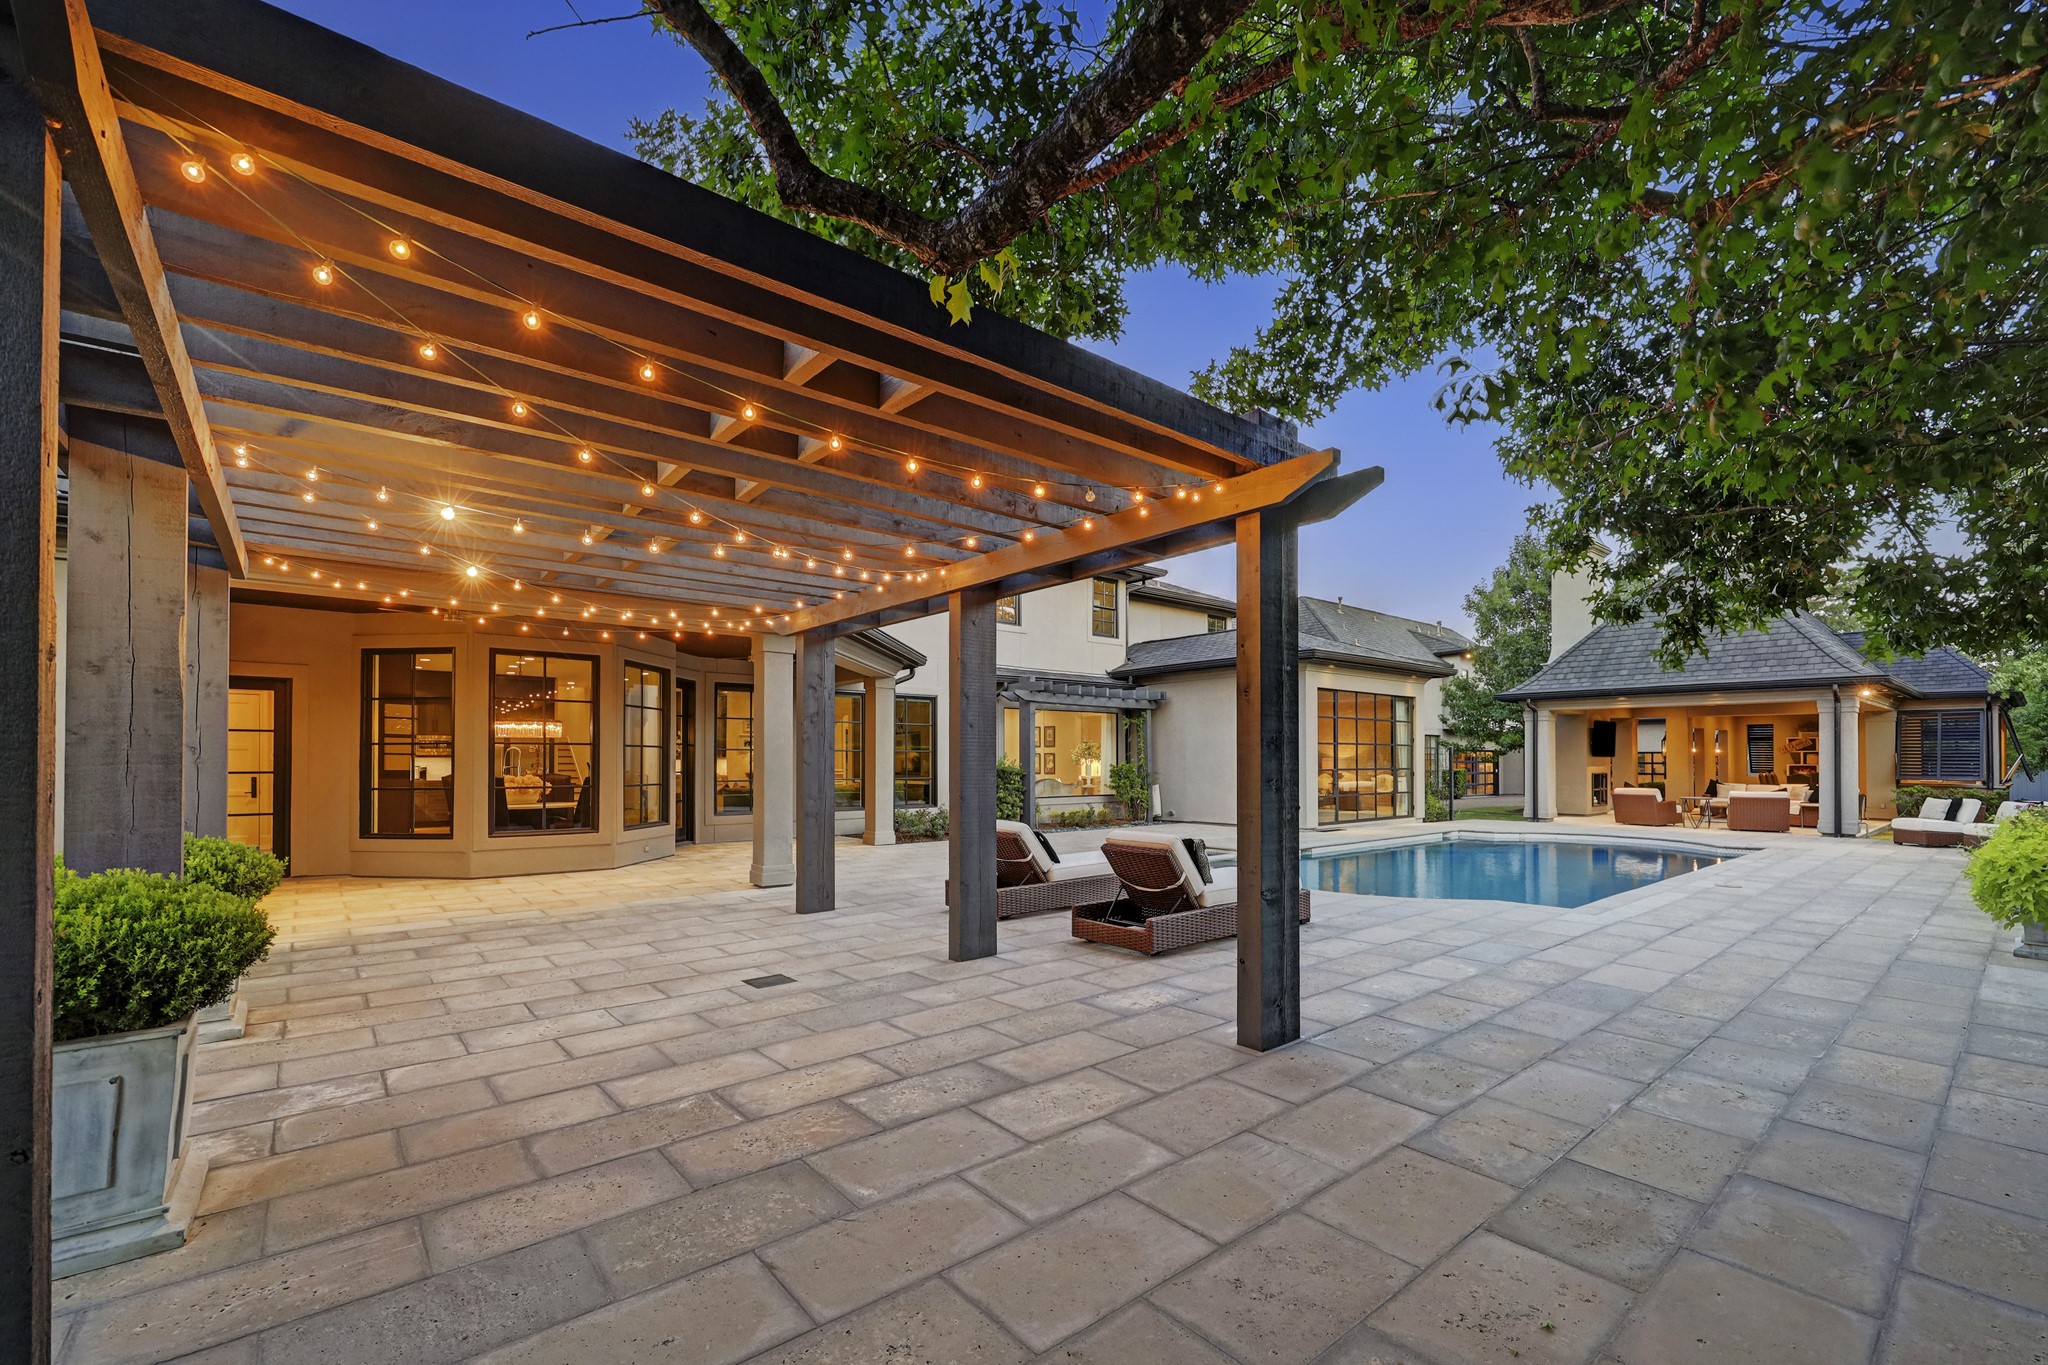 A wooden pergola covers a portion of the pavers, offering an opportunity to make this area whatever you desire – located conveniently next to the outdoor kitchen.